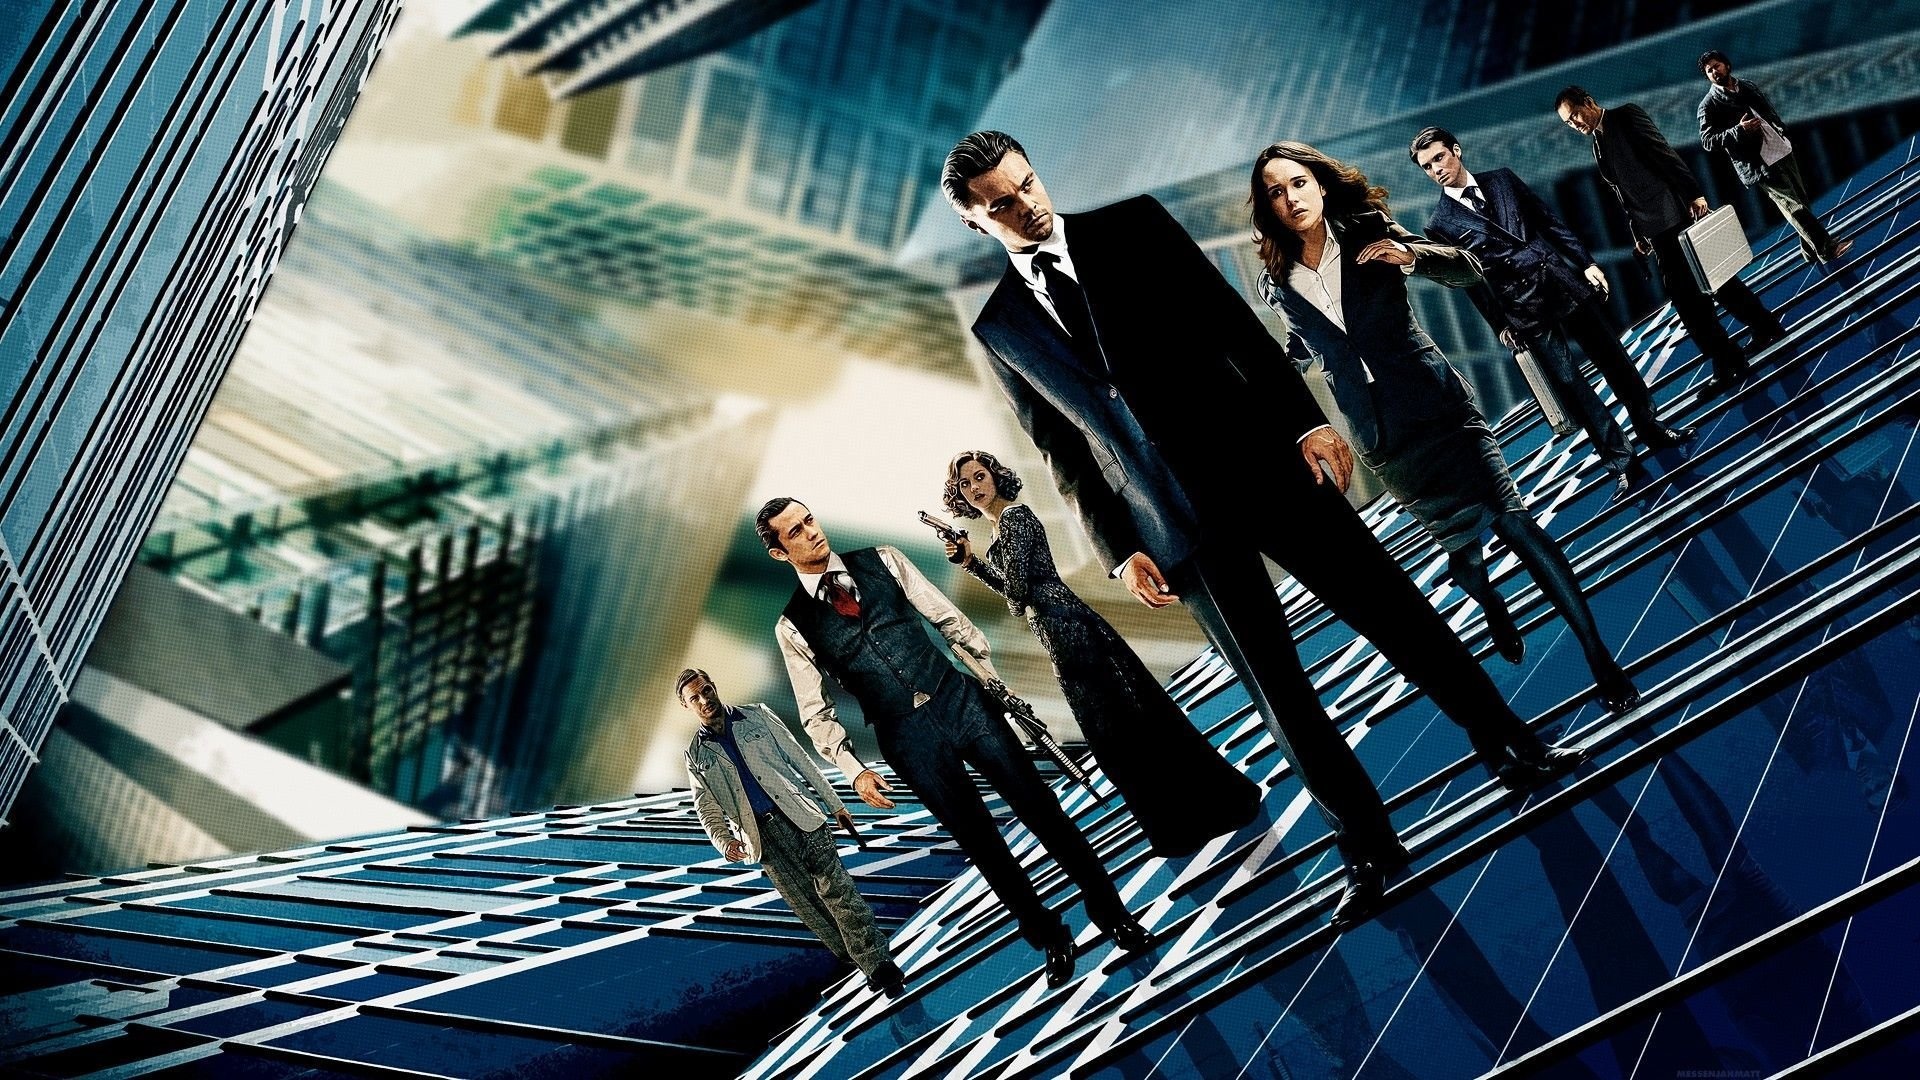 Inception: The third most pirated film of 2010, Leonardo DiCaprio. 1920x1080 Full HD Wallpaper.